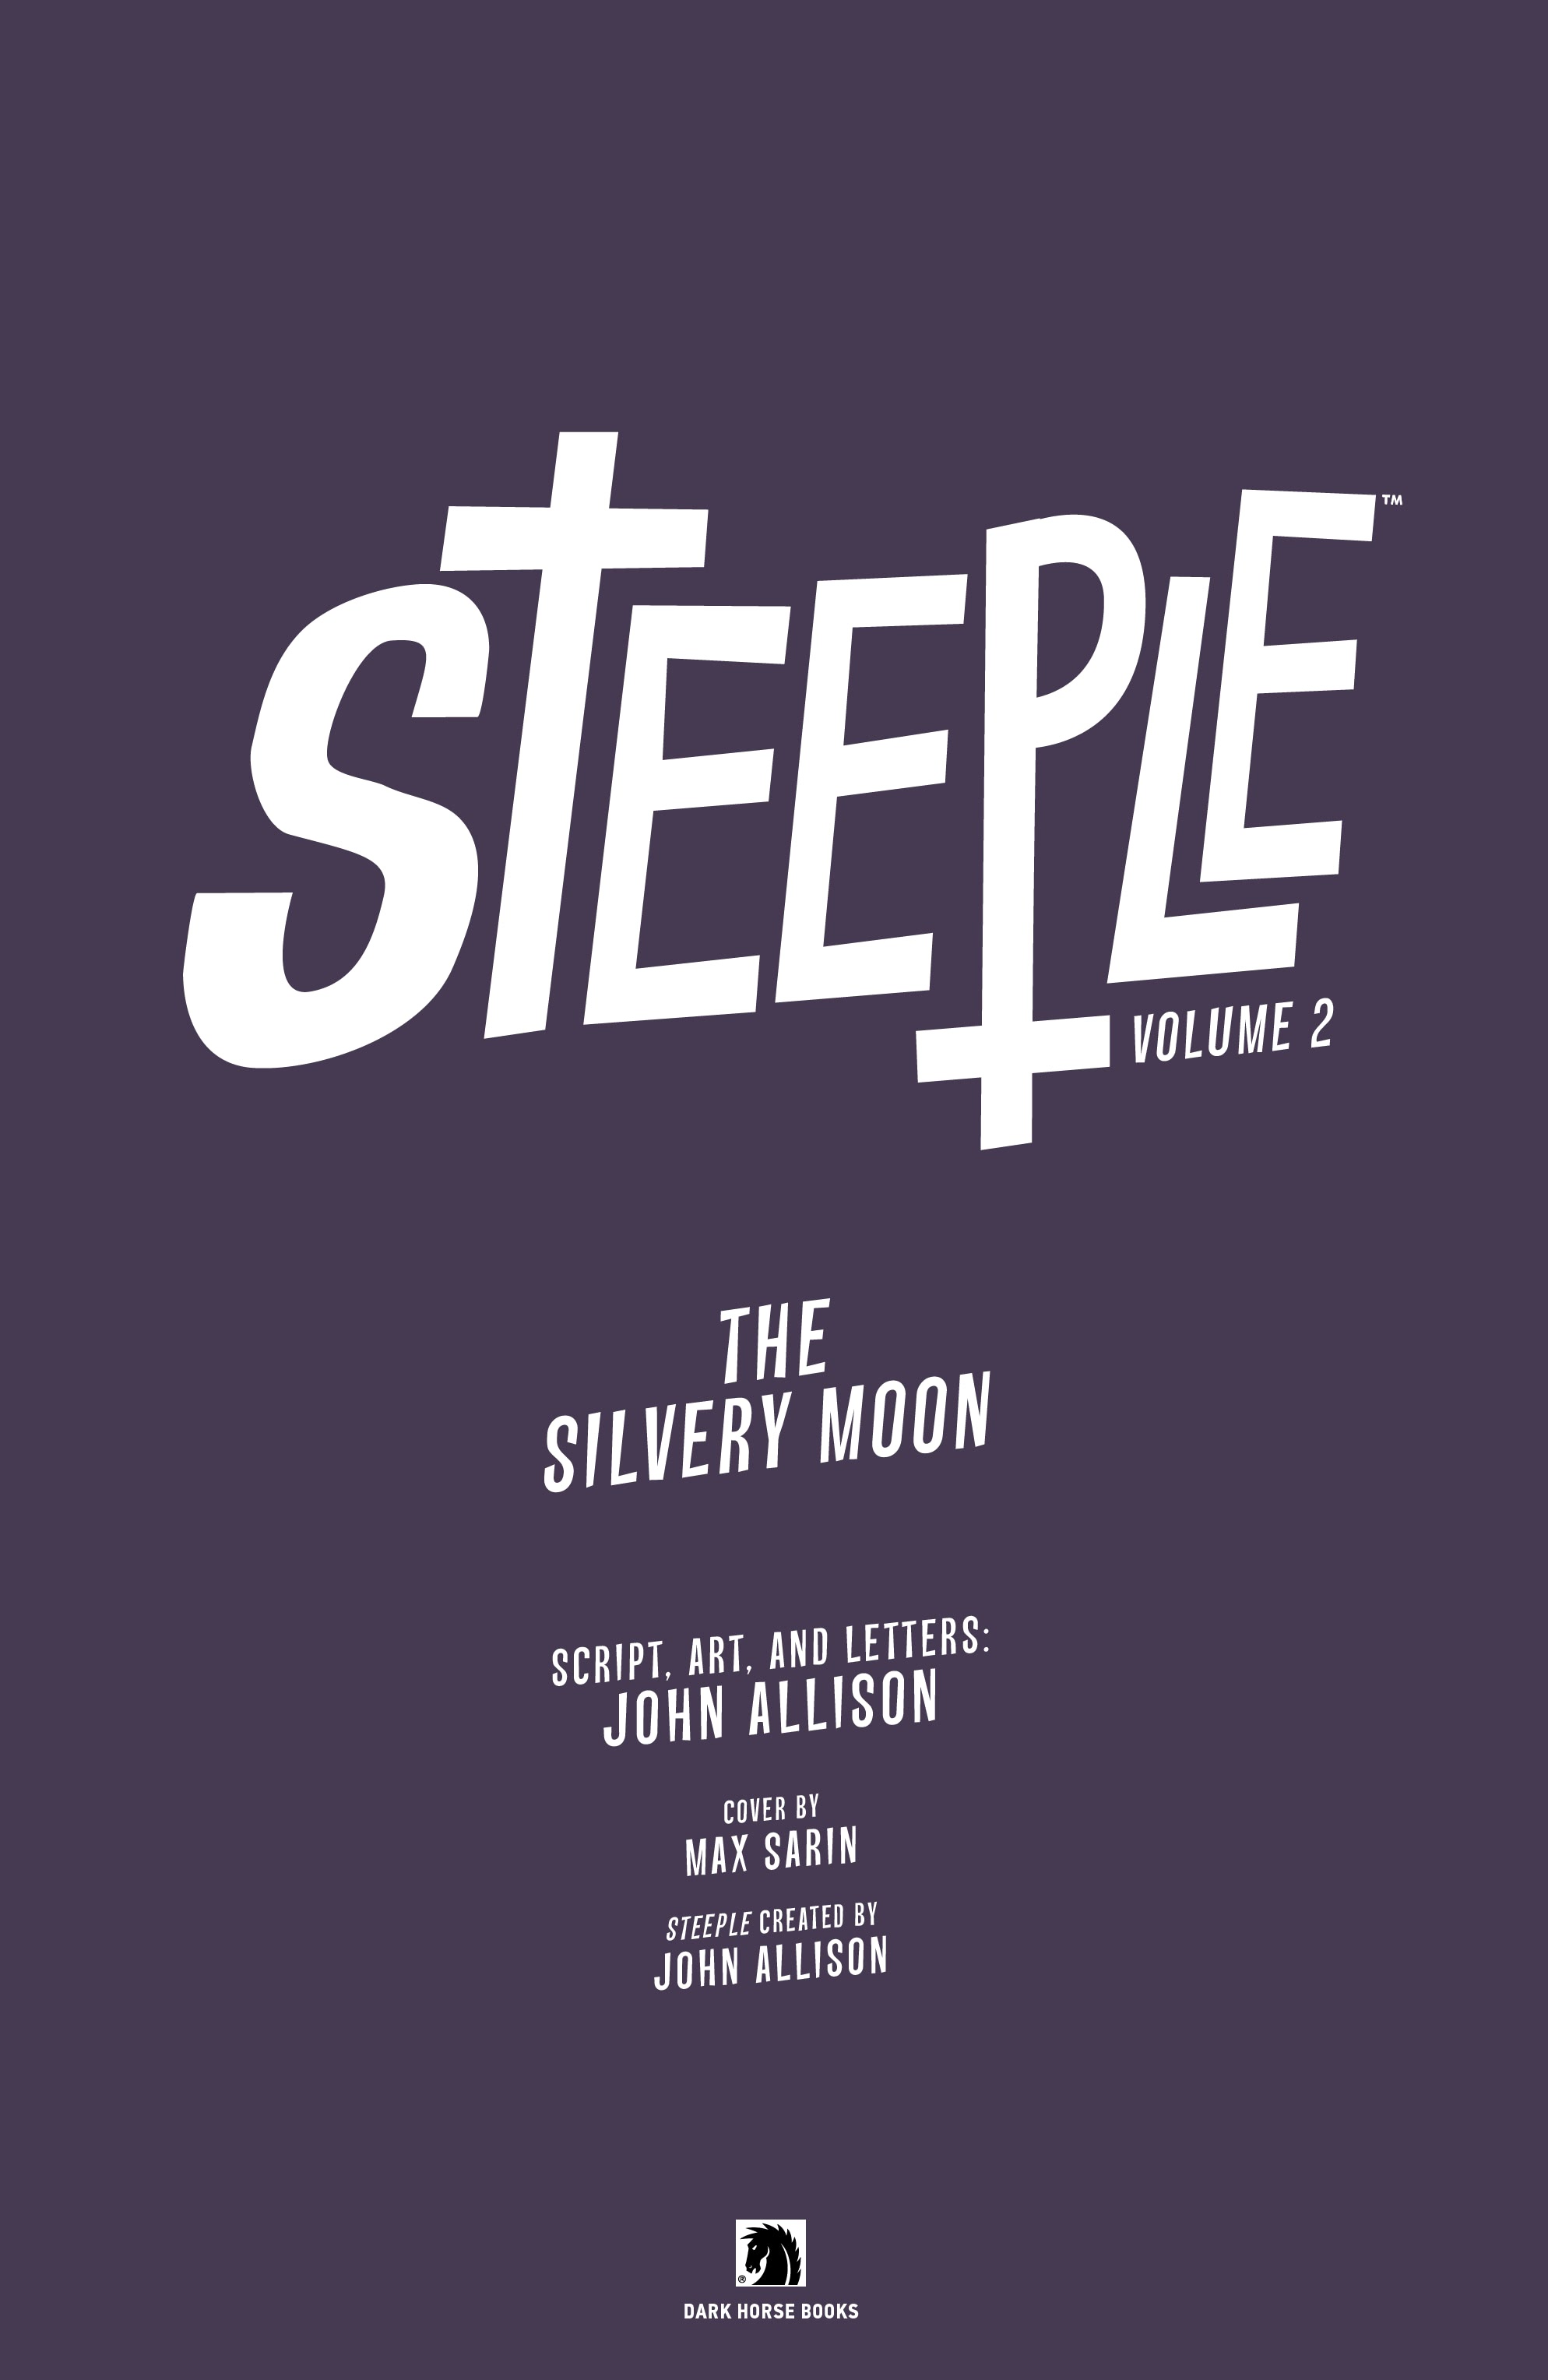 Read online Steeple: The Silvery Moon comic -  Issue # TPB - 4